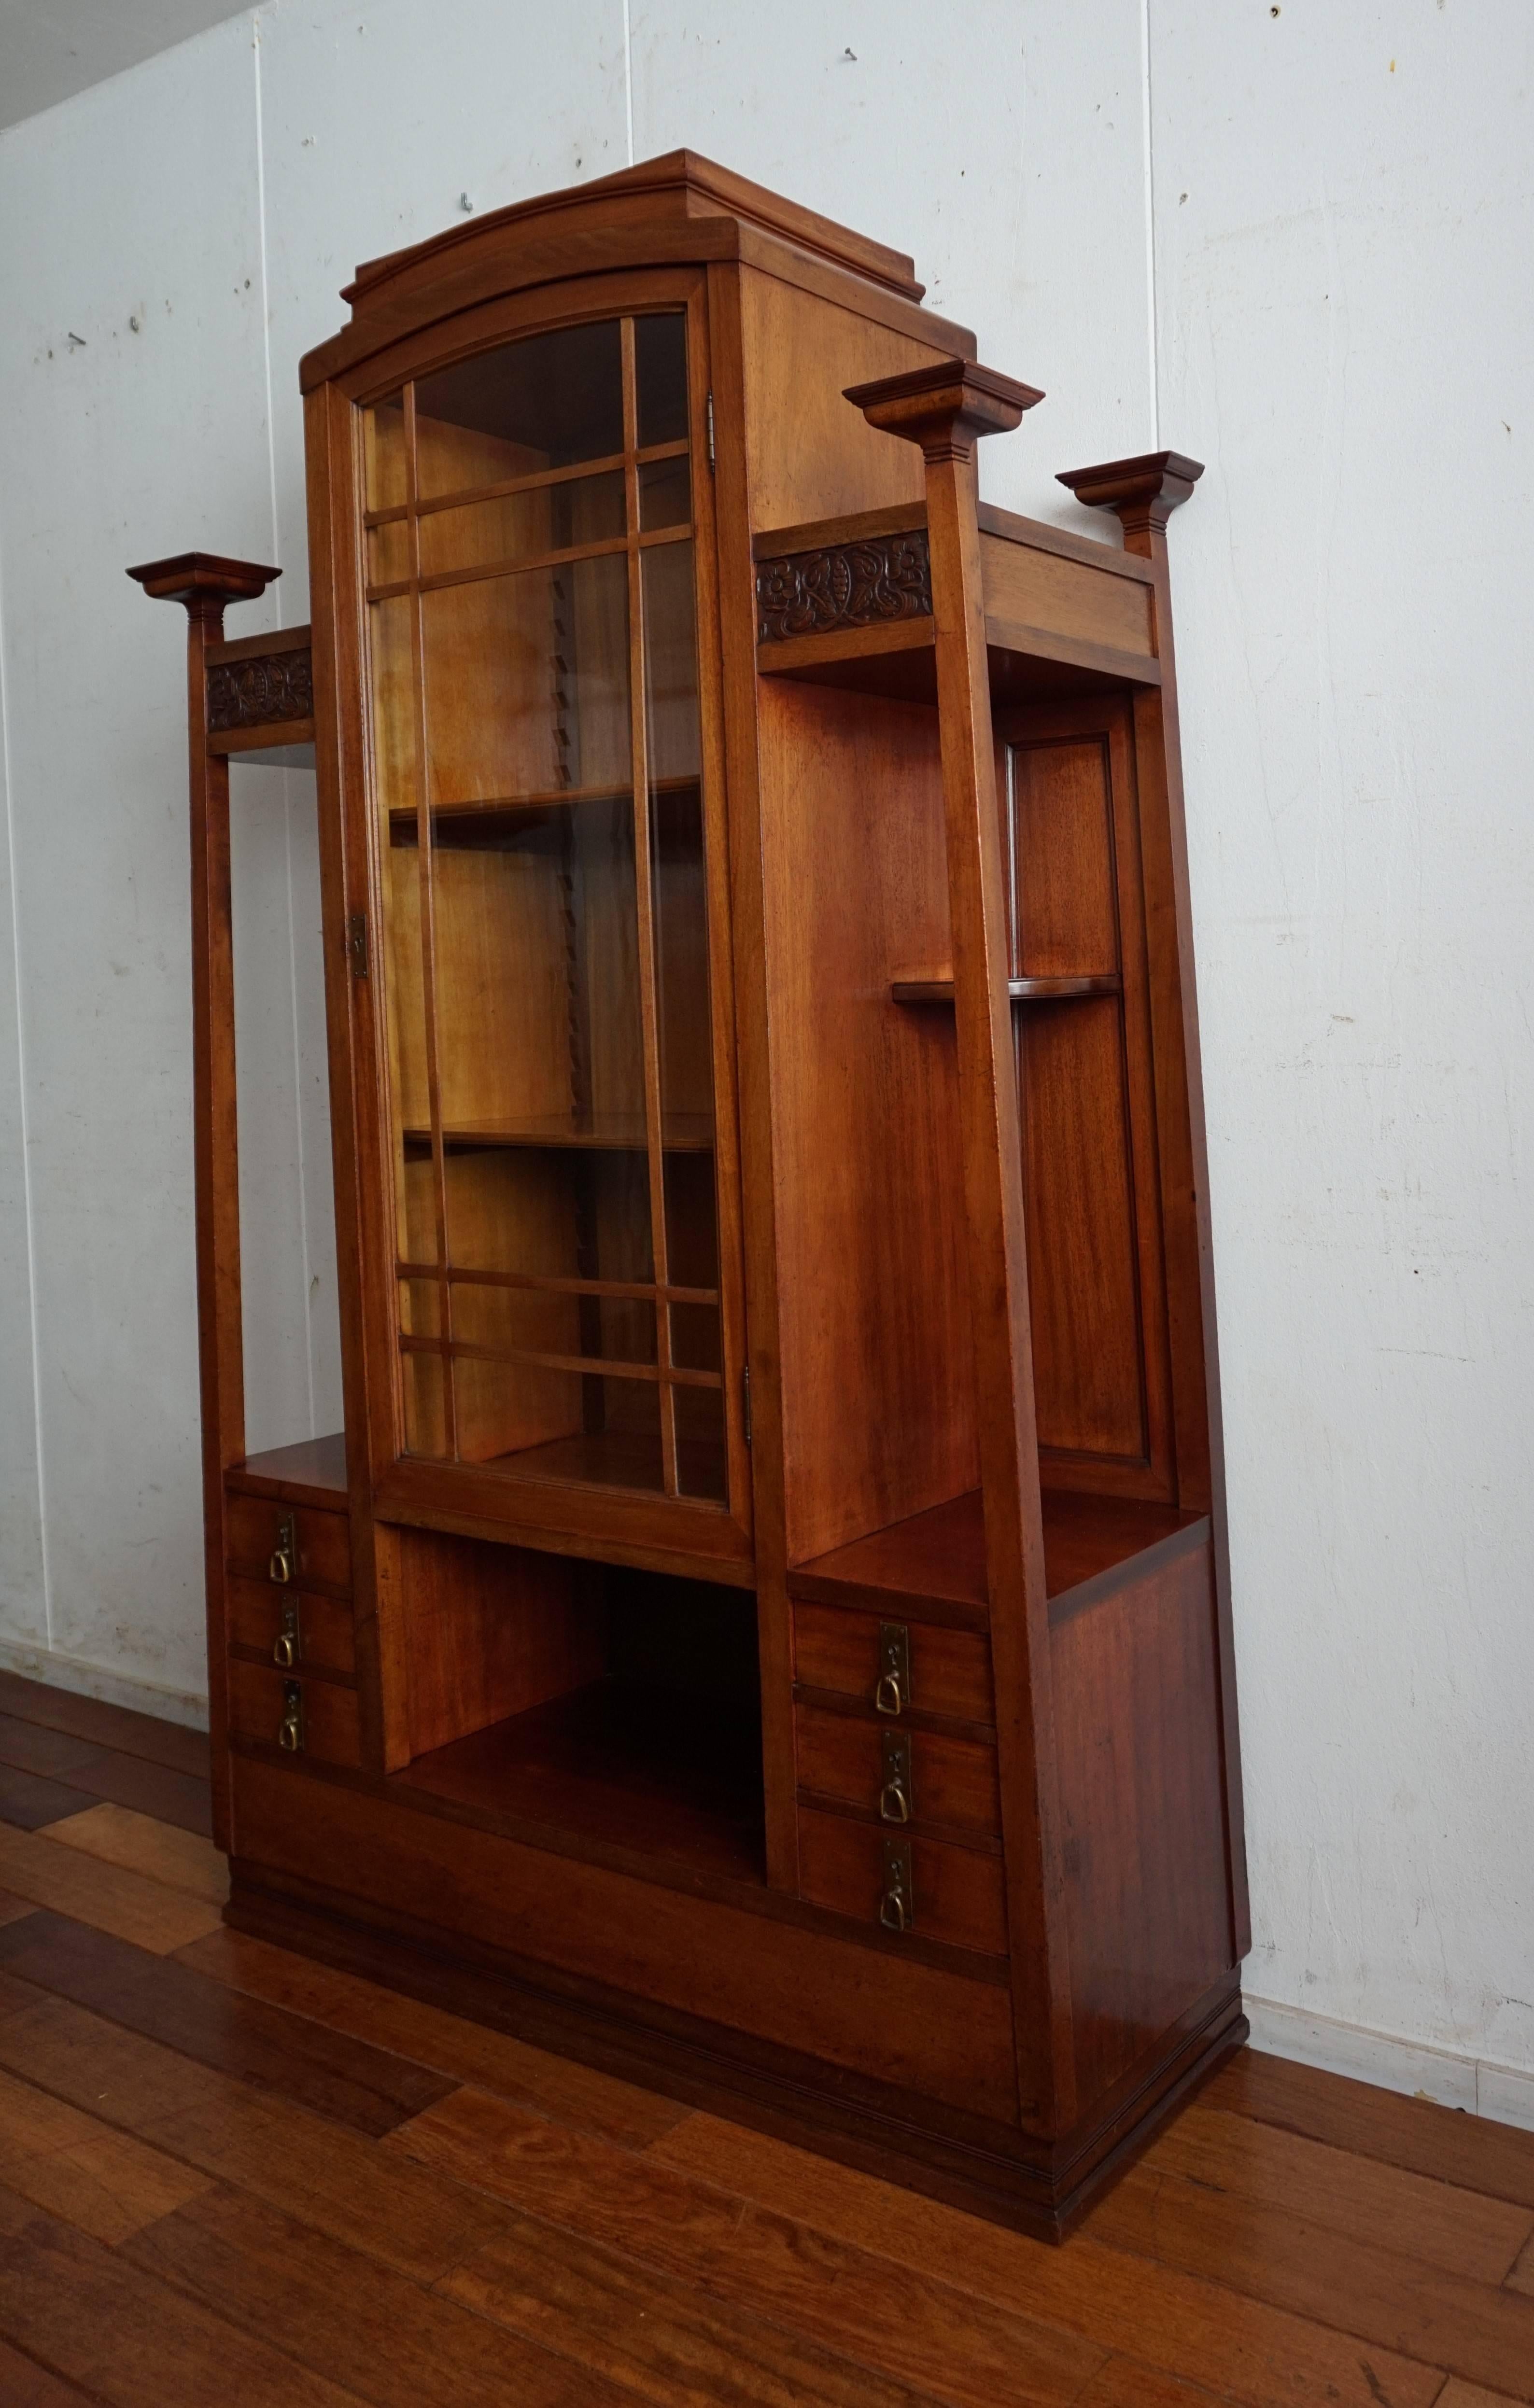 Mahogany Early 20th Century Art Nouveau Display Cabinet with Drawers and Pilars for Vases